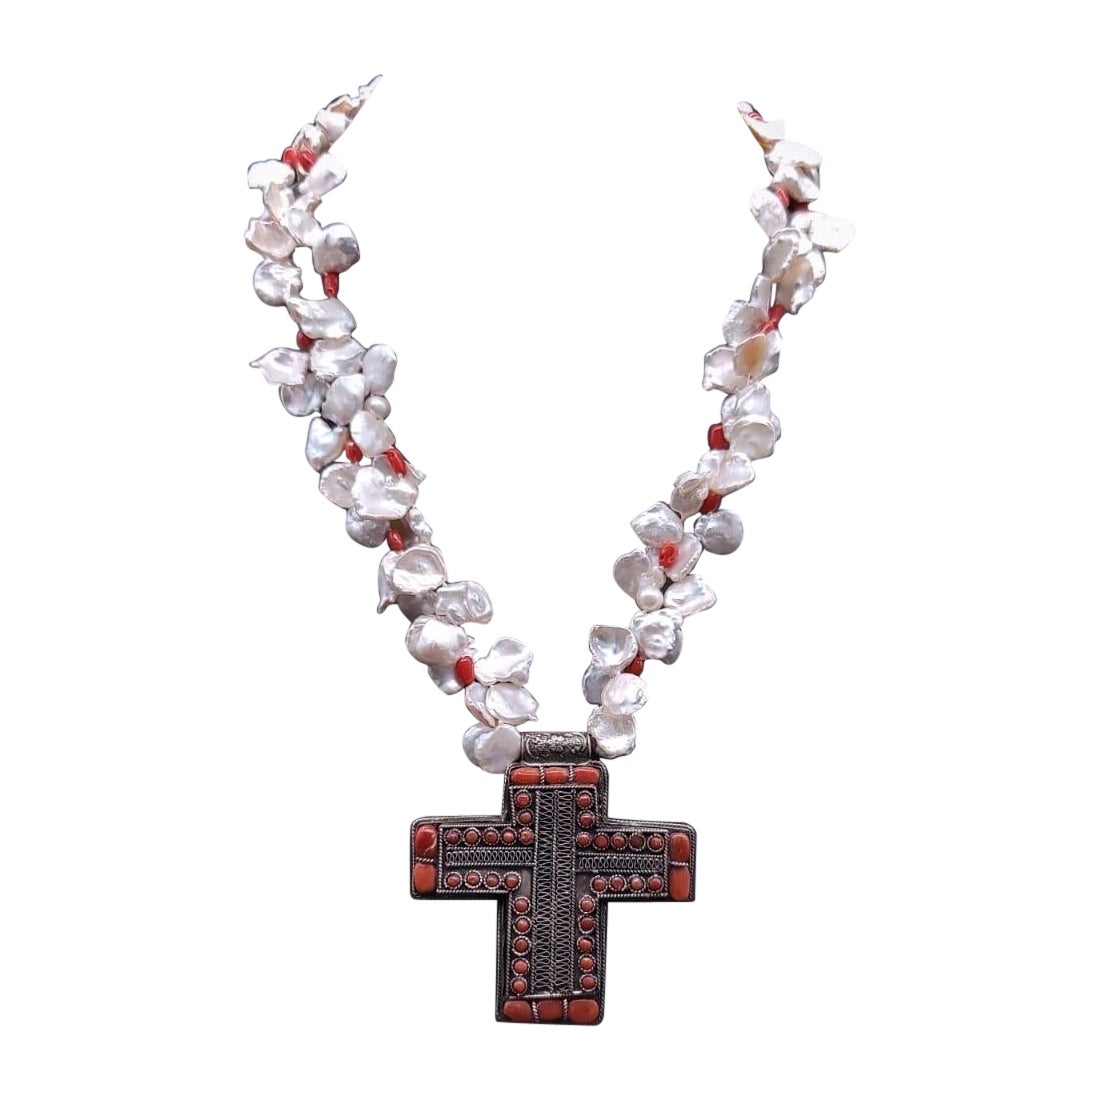 A.Jeschel Stunning Keshi Pearl necklace with silver cross pendant. For Sale